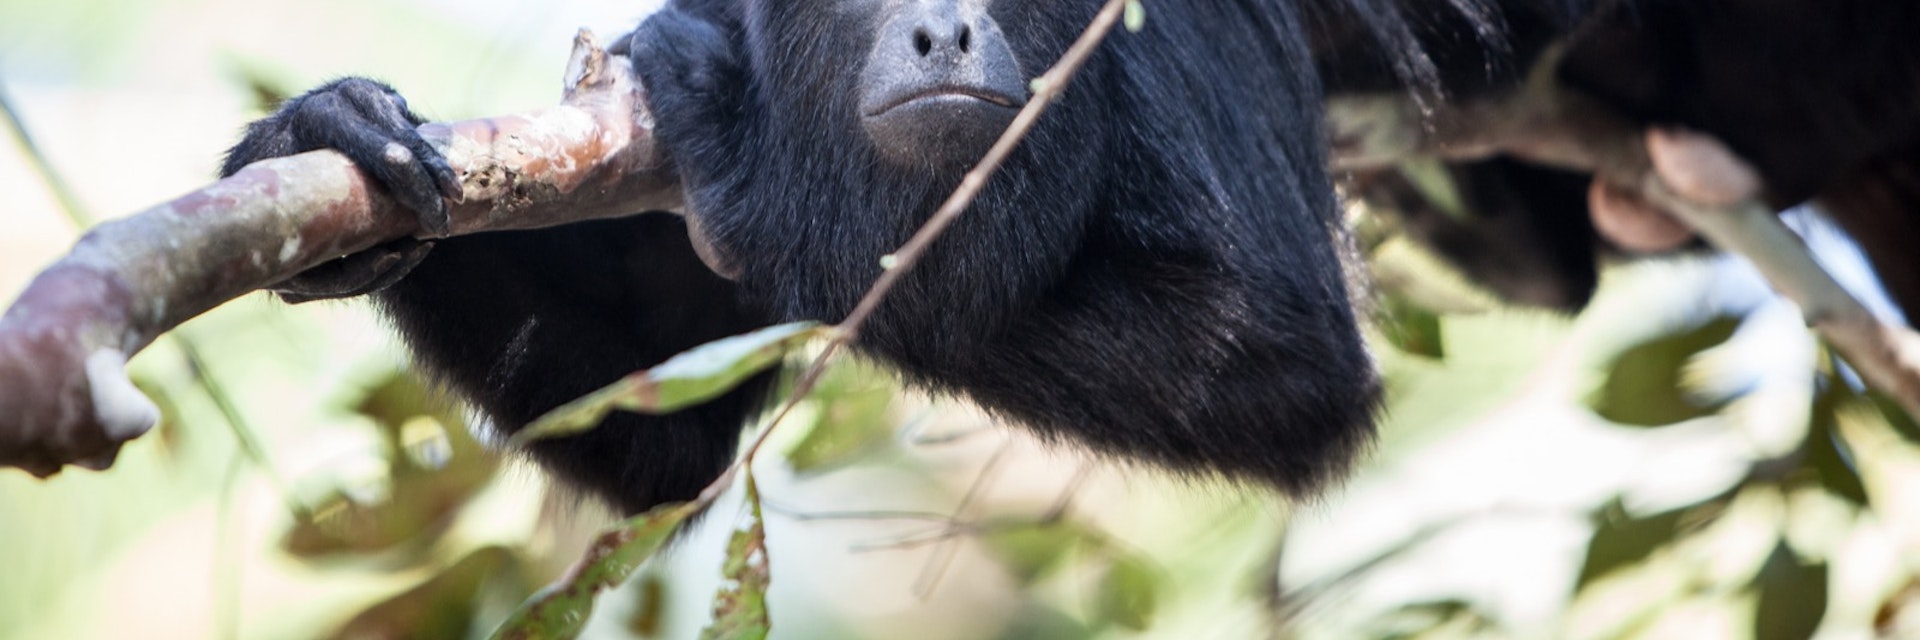 A Black Howler monkey (Alouatta pigra) rests in the jungle canopy of Belize. Black howlers, found in Mexico, Guatemala, and Belize, are folivorous, eating mostly leaves and occasional fruits.; Shutterstock ID 260268743; Your name (First / Last): Alicia Johnson; GL account no.: 65050; Netsuite department name: Online Editorial ; Full Product or Project name including edition: Belize